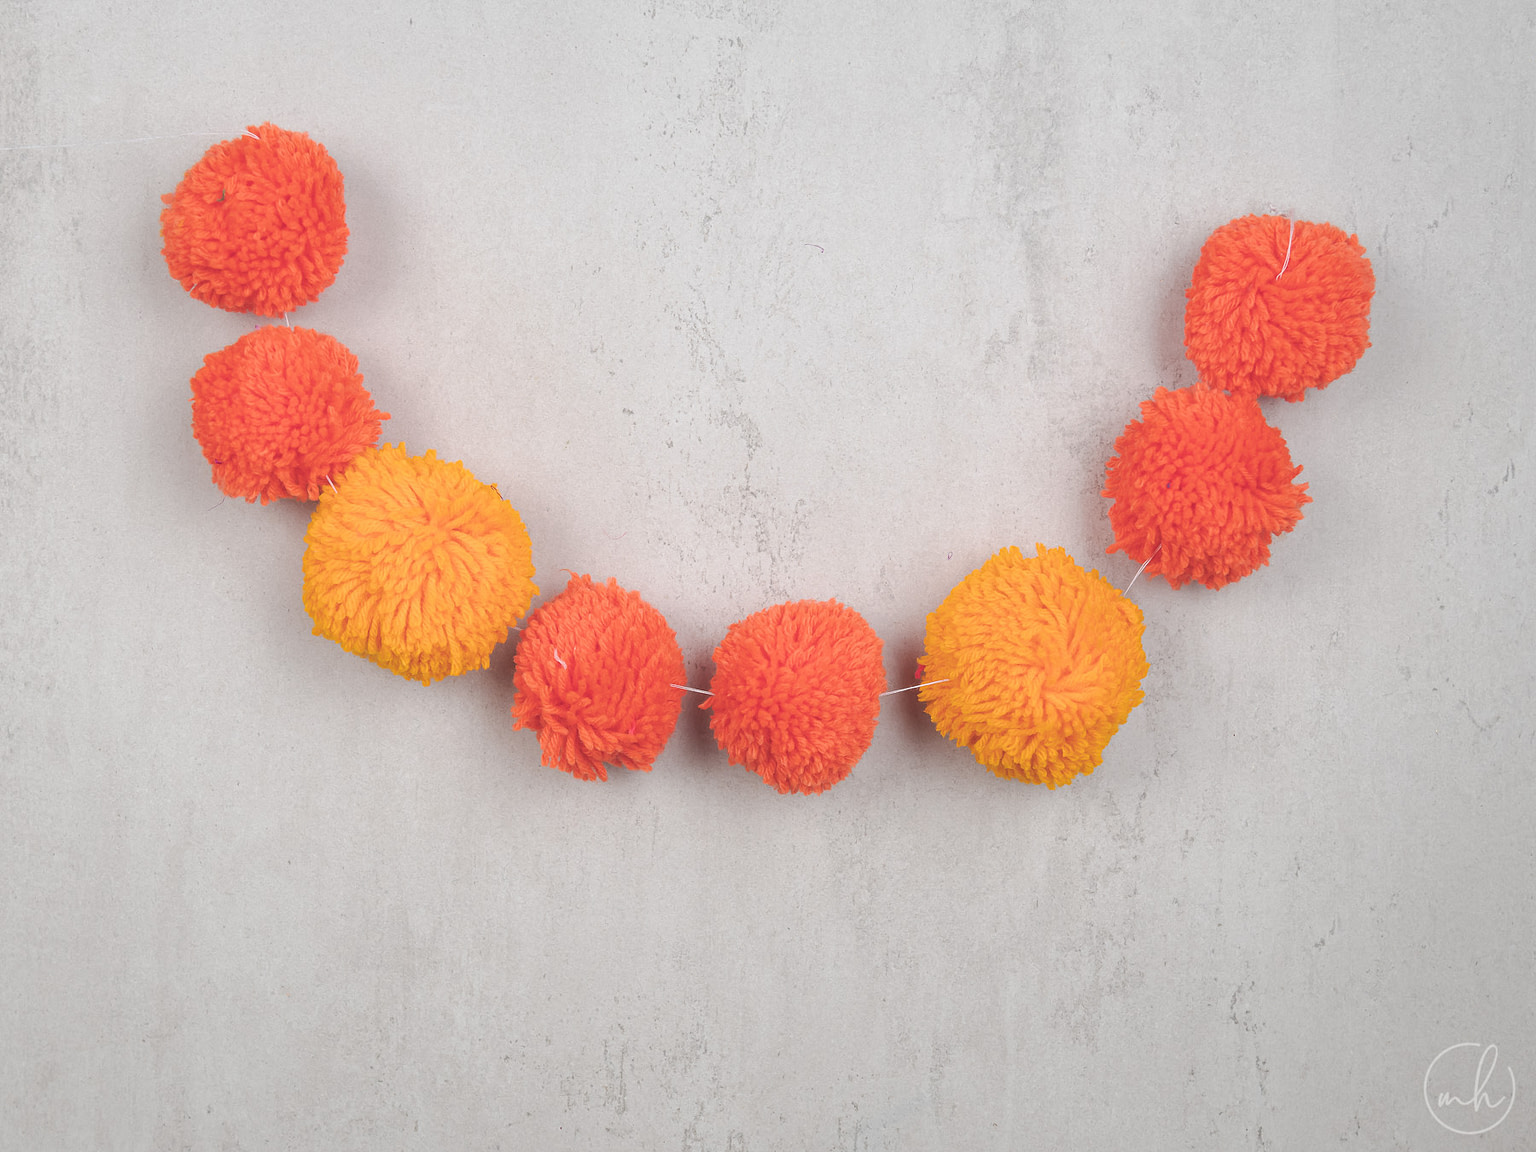 Red-yellow pompoms strung on a thread